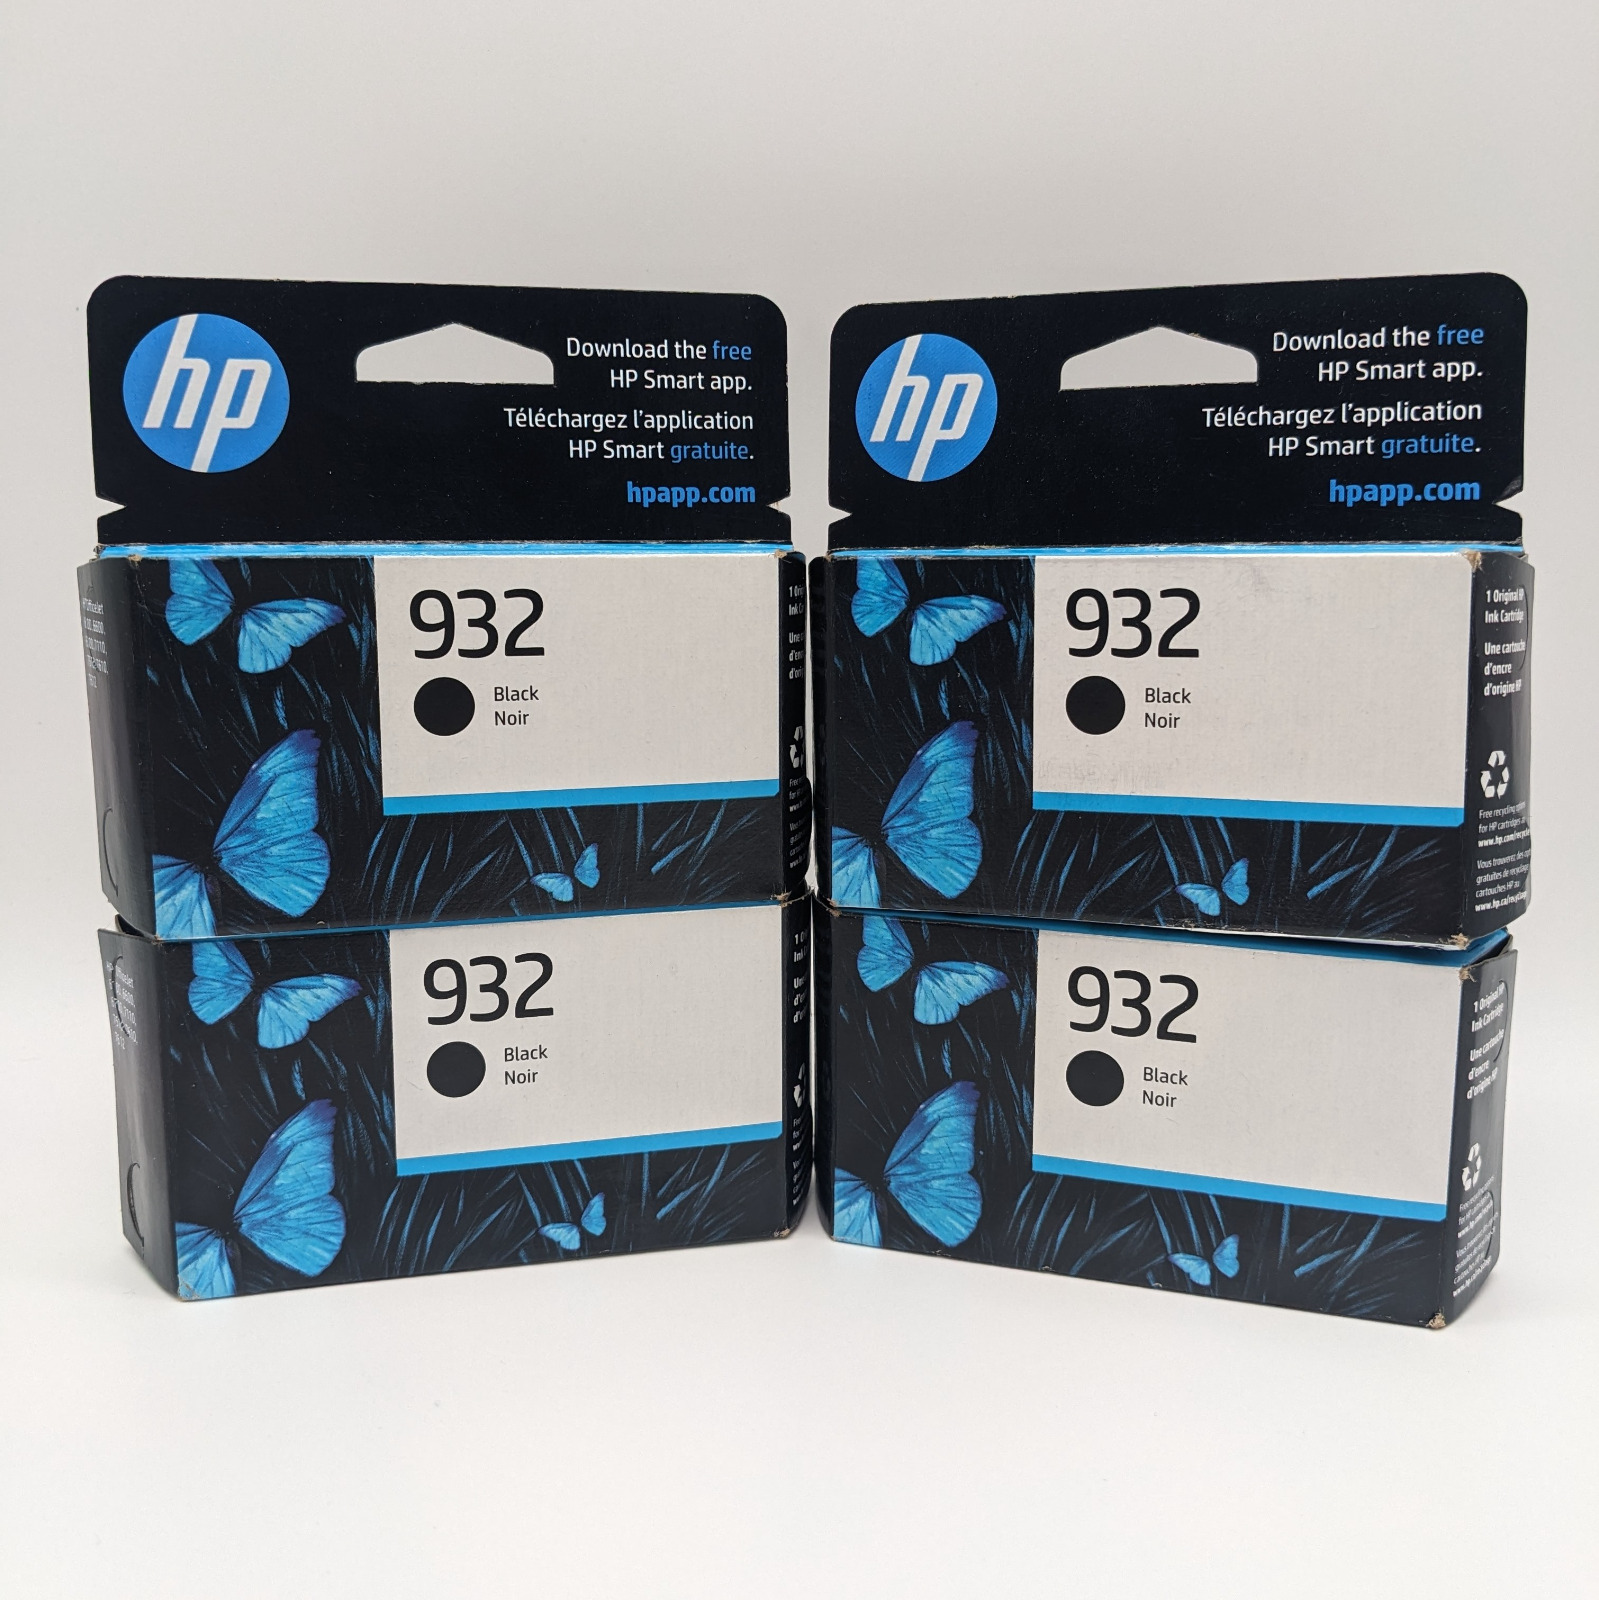 Lot of 4 GENUINE HP 932 Black Ink Cartridges CN057AN Sealed New (Expired 03/24)